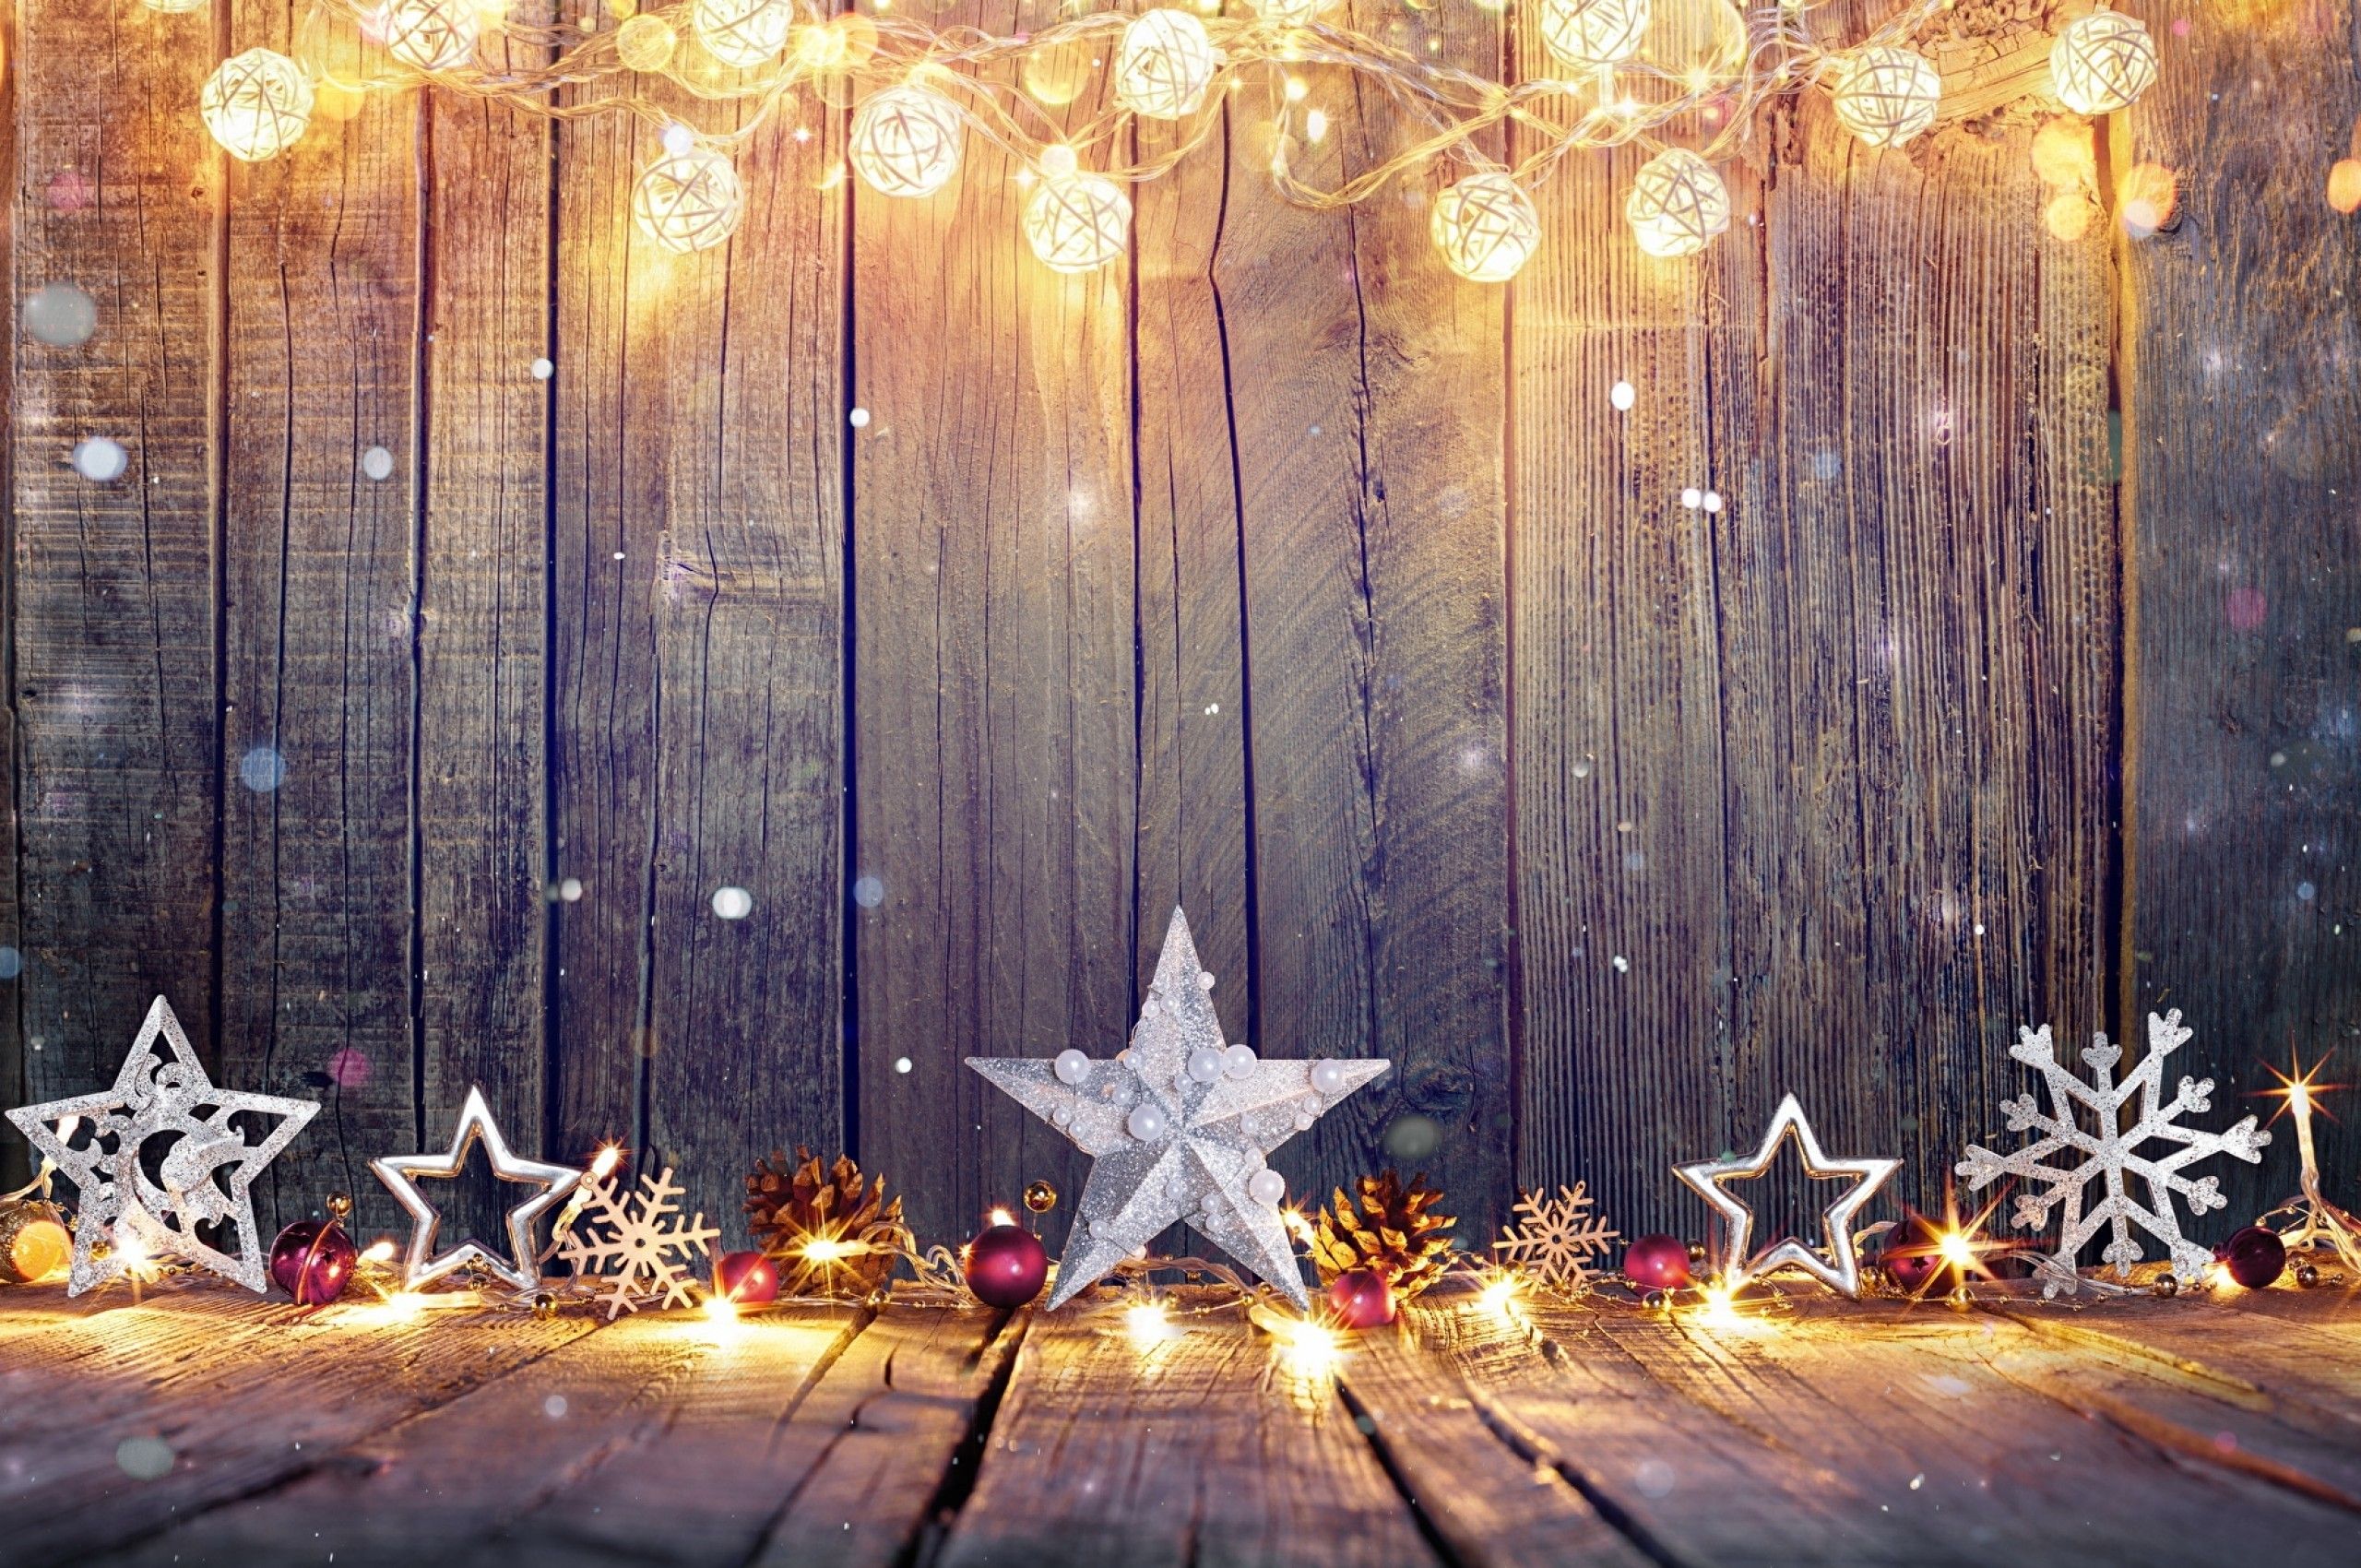 Download 2560x1700 Christmas, Lights, Holiday Wallpapers for Chromebook Pixel